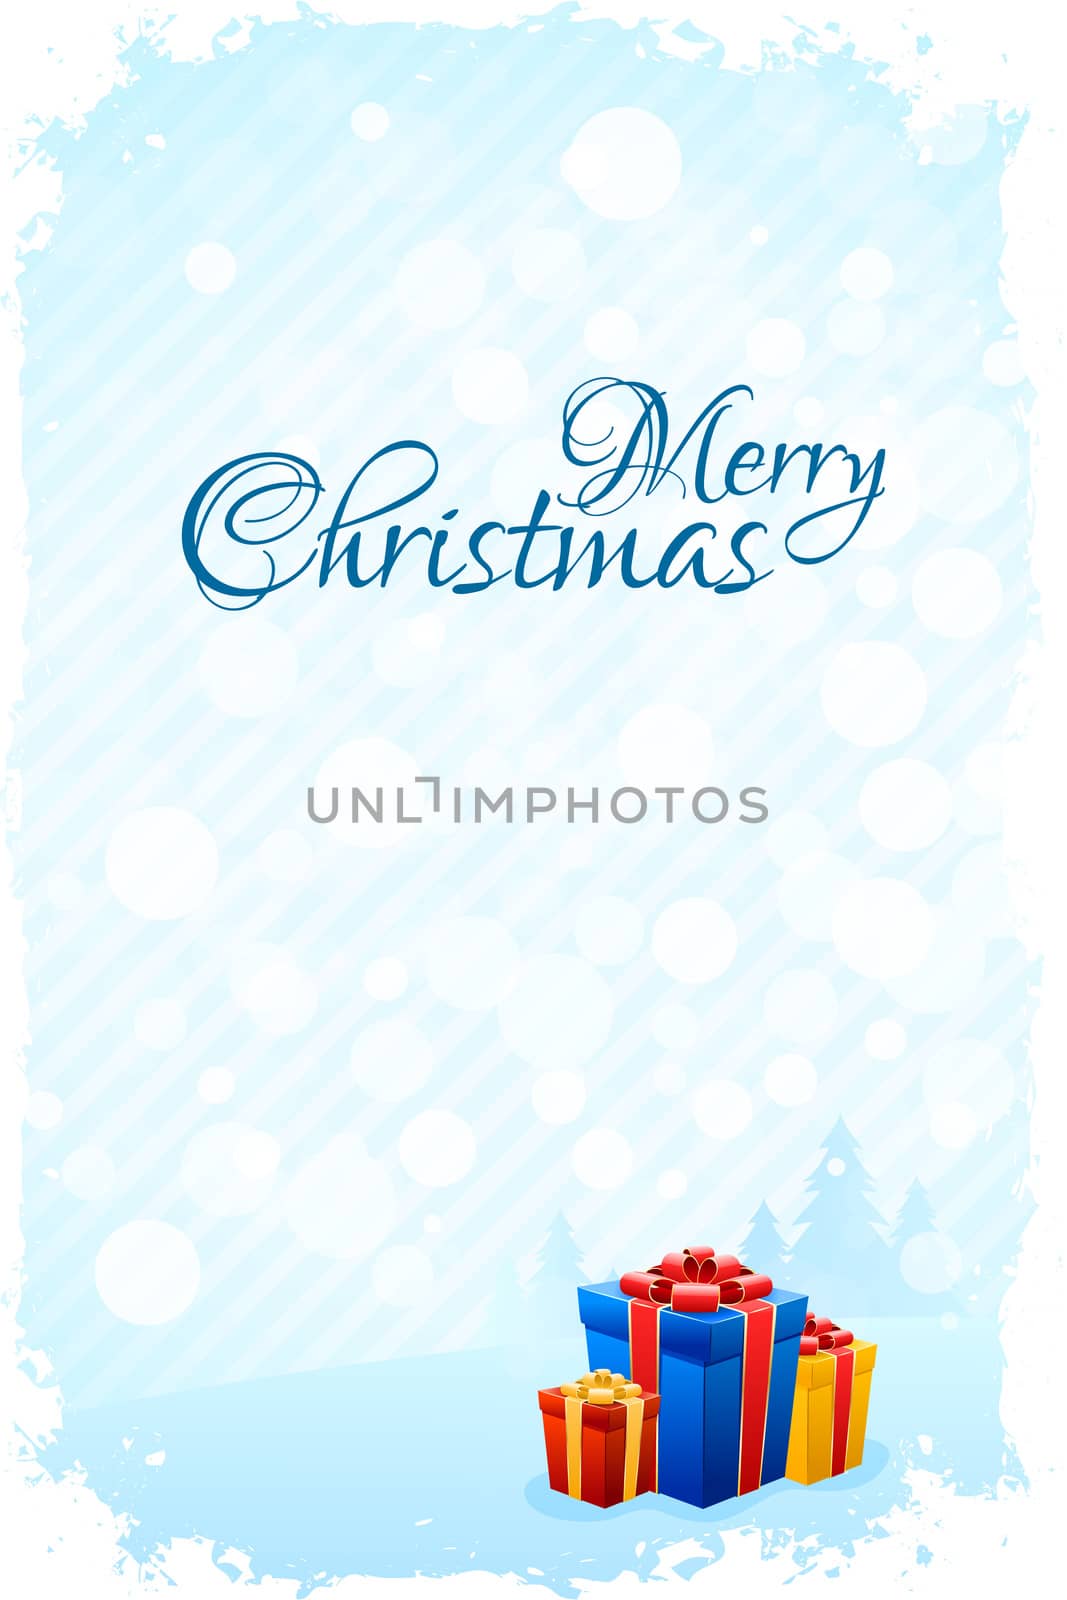 Grungy Christmas Greeting Card by WaD